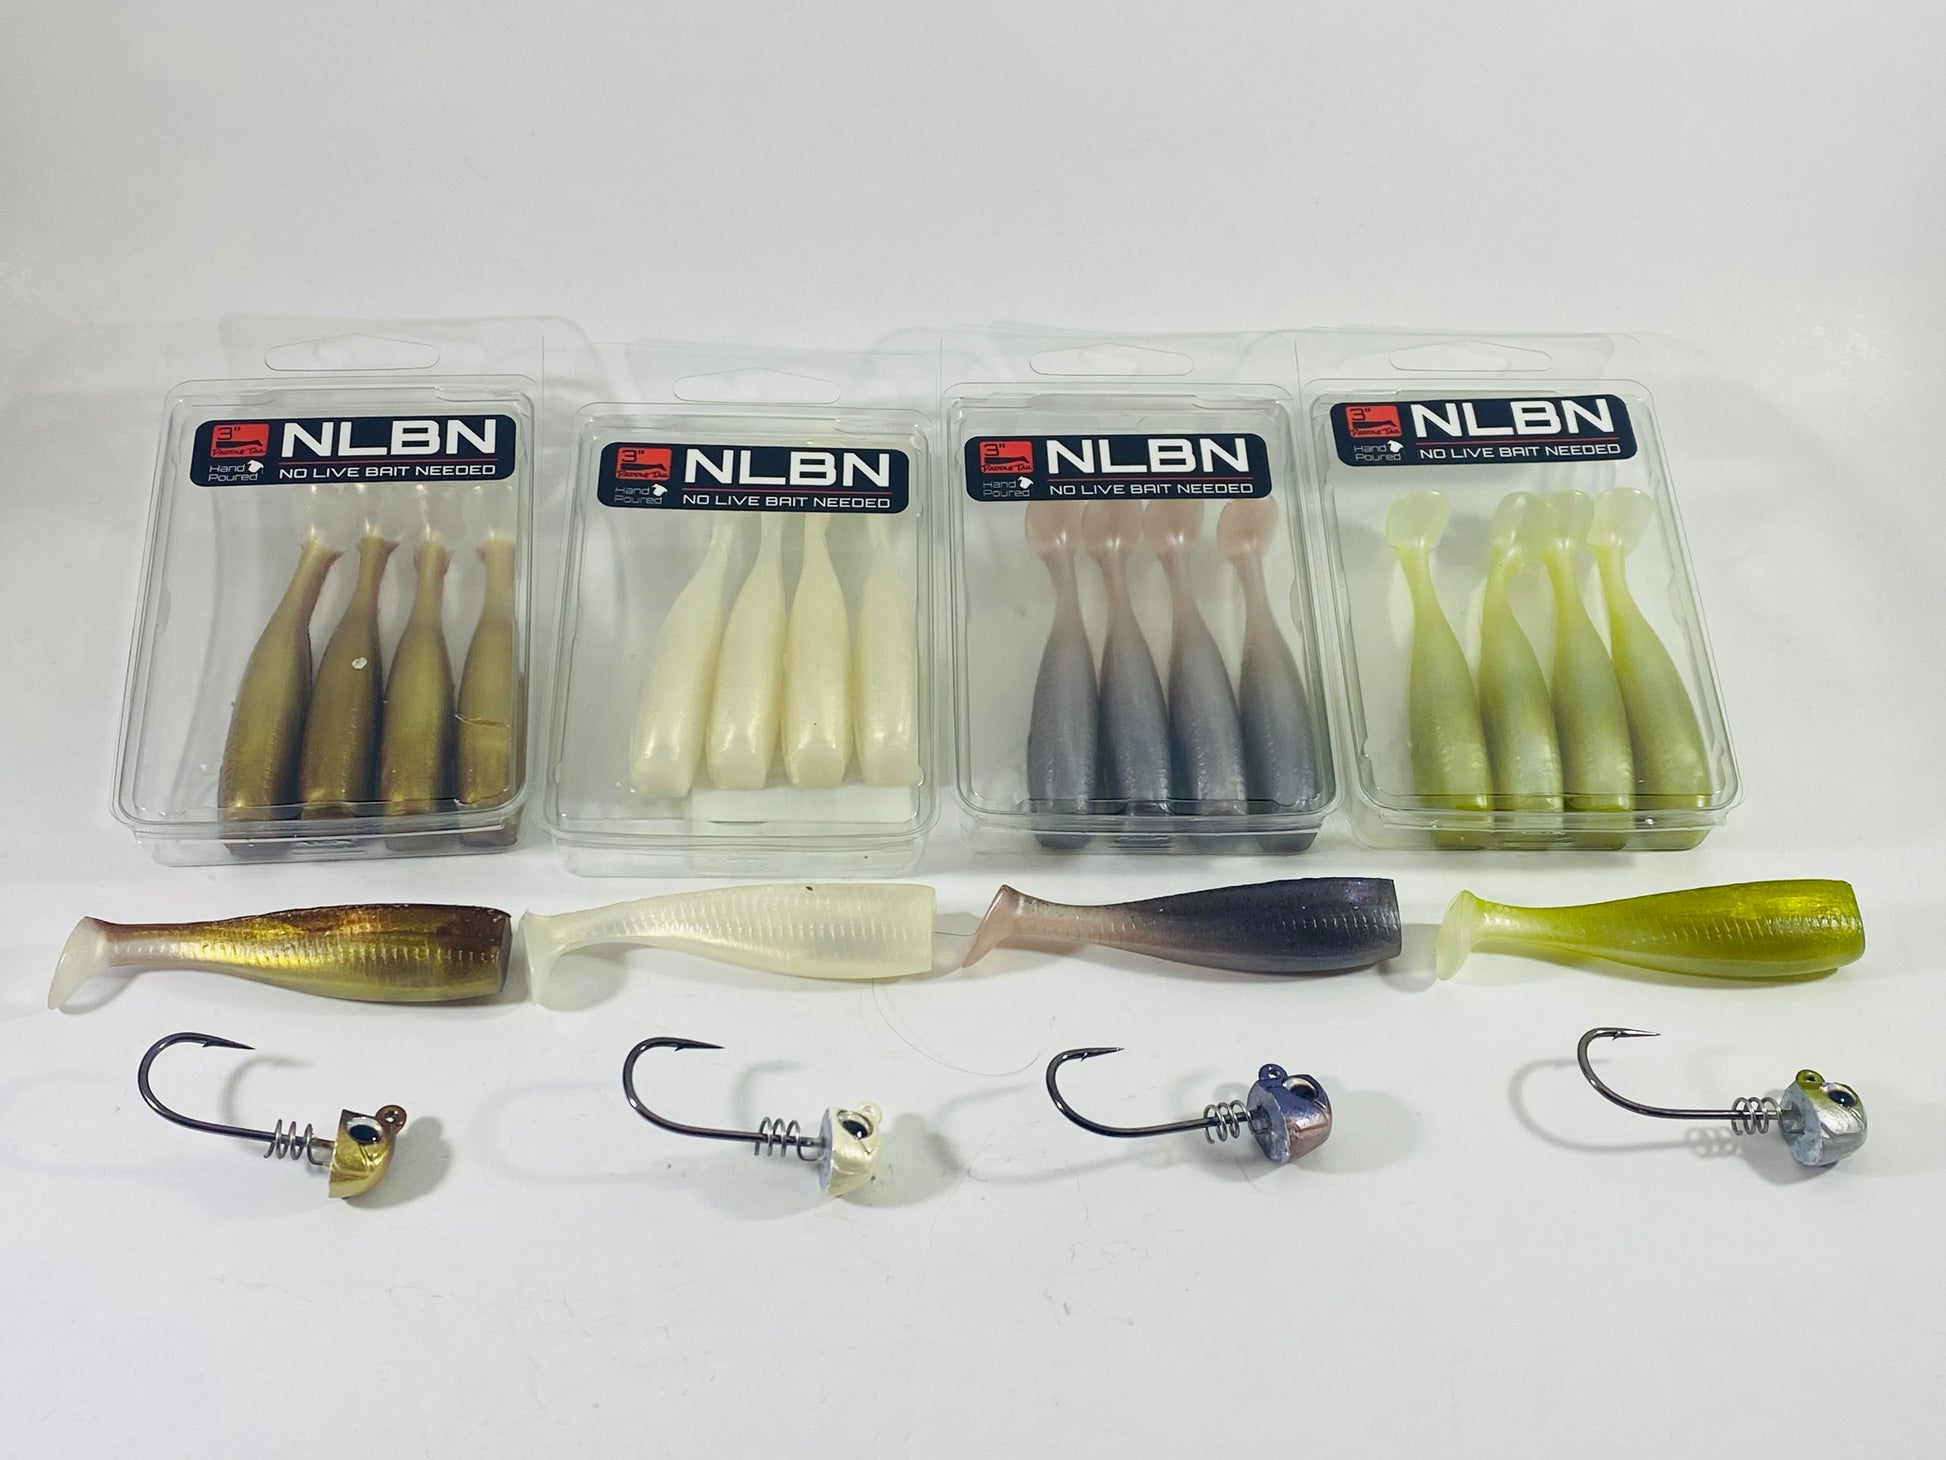 No Live Bait Needed 8 Paddle Tail Green Back